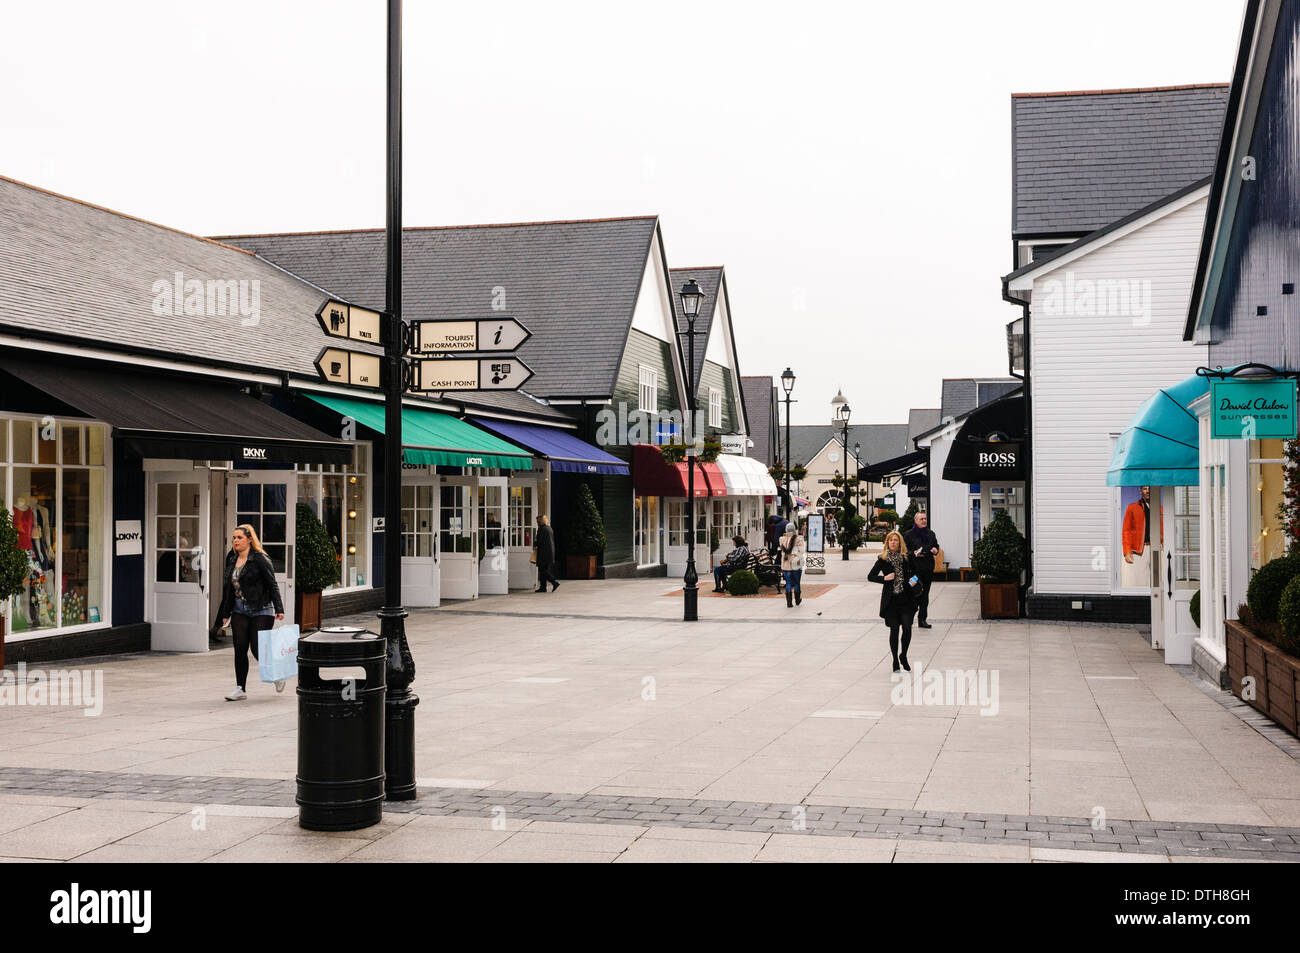 Kildare Village High Resolution Stock Photography and Images - Alamy